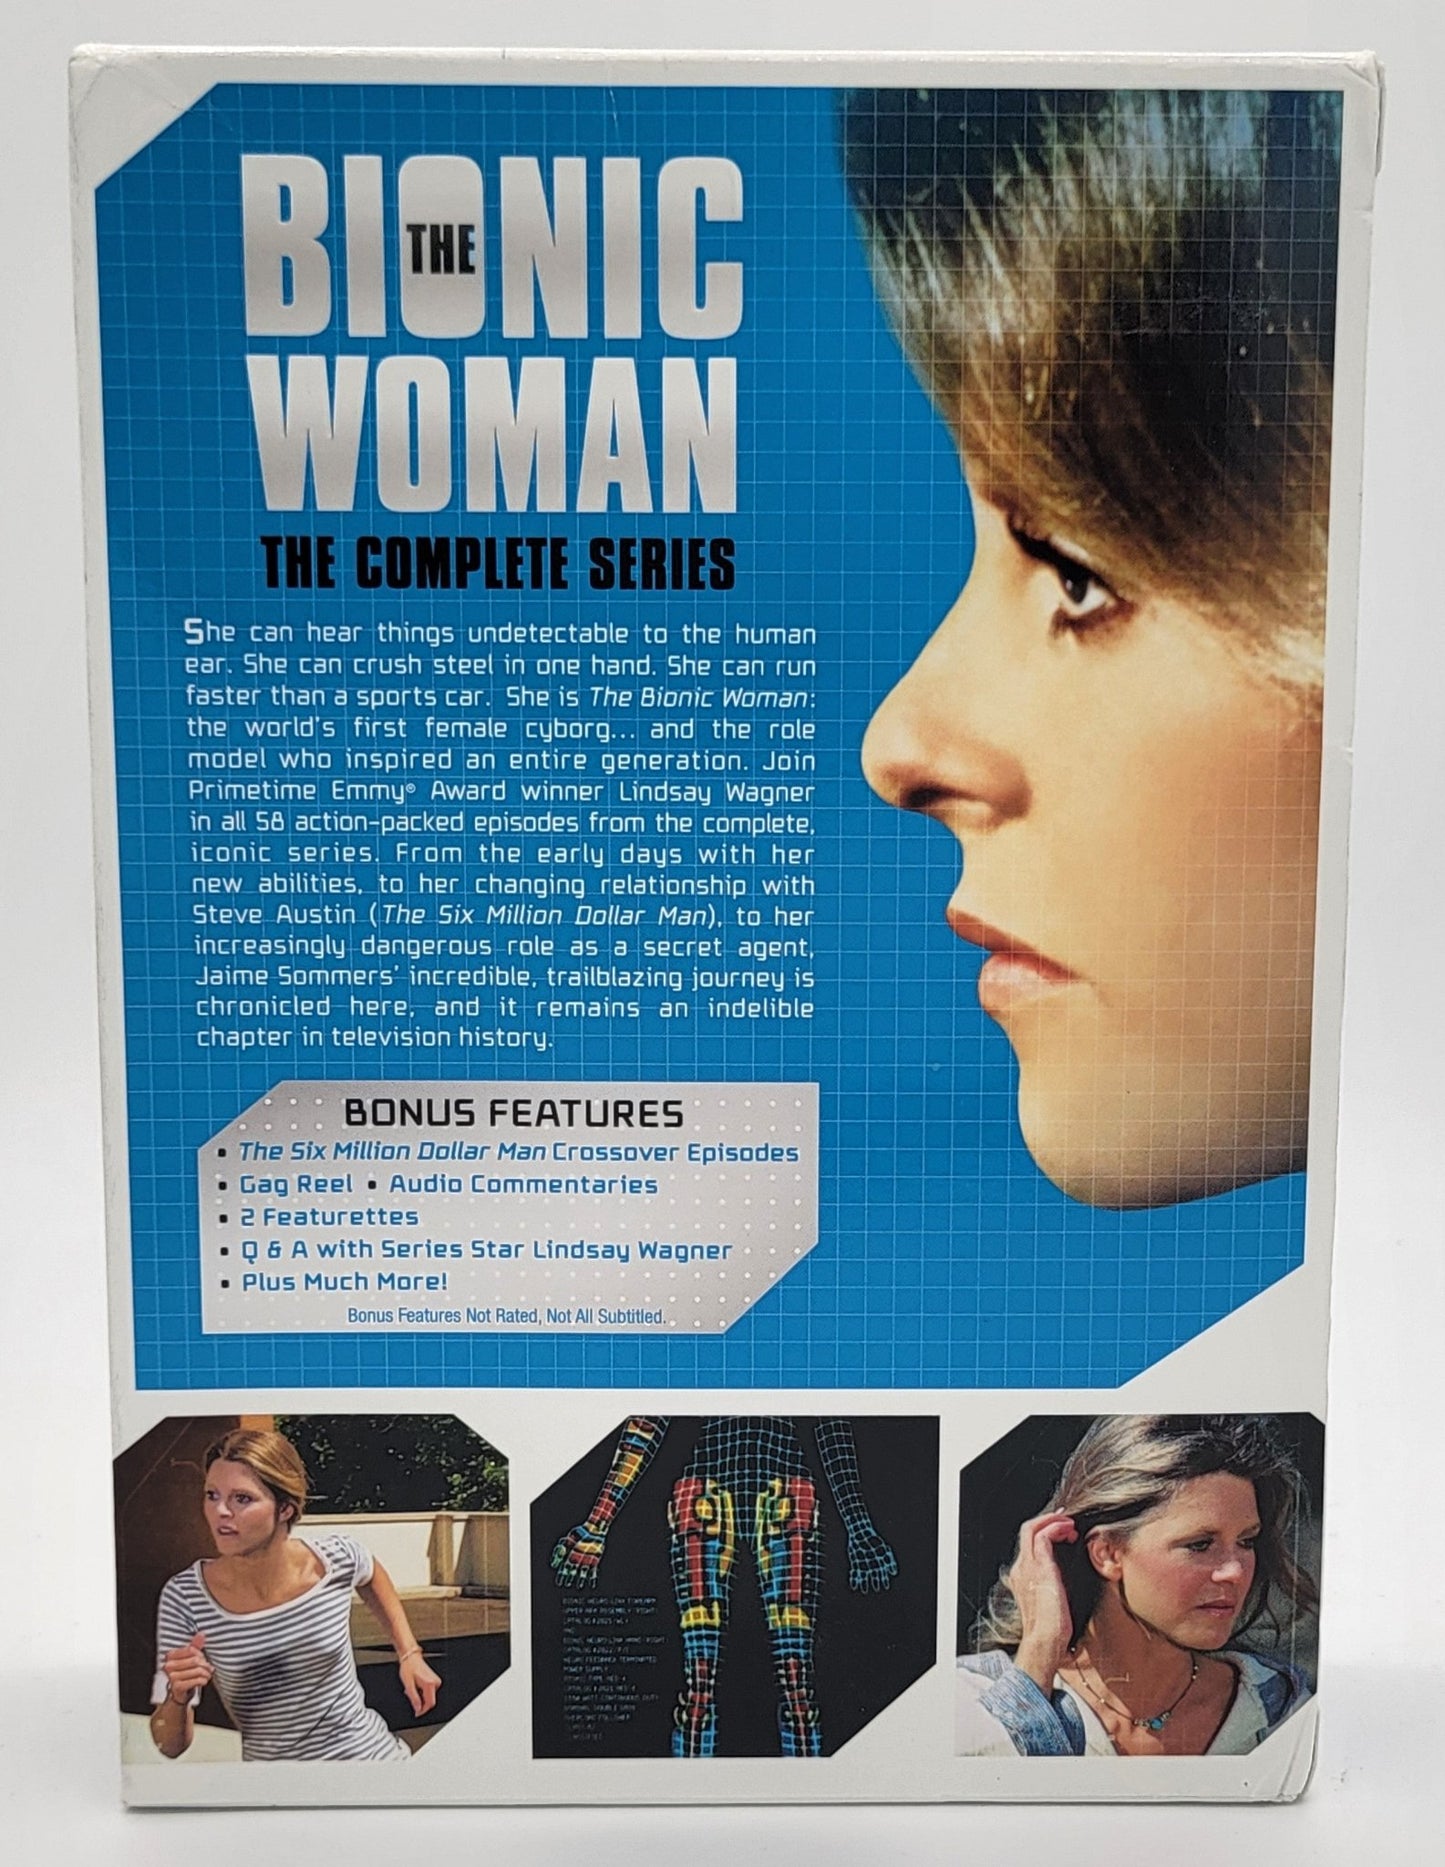 Universal Studios Home Entertainment - The Bionic Woman | The Complete Series | DVD | Complete Series | Full Frame - DVD - Steady Bunny Shop